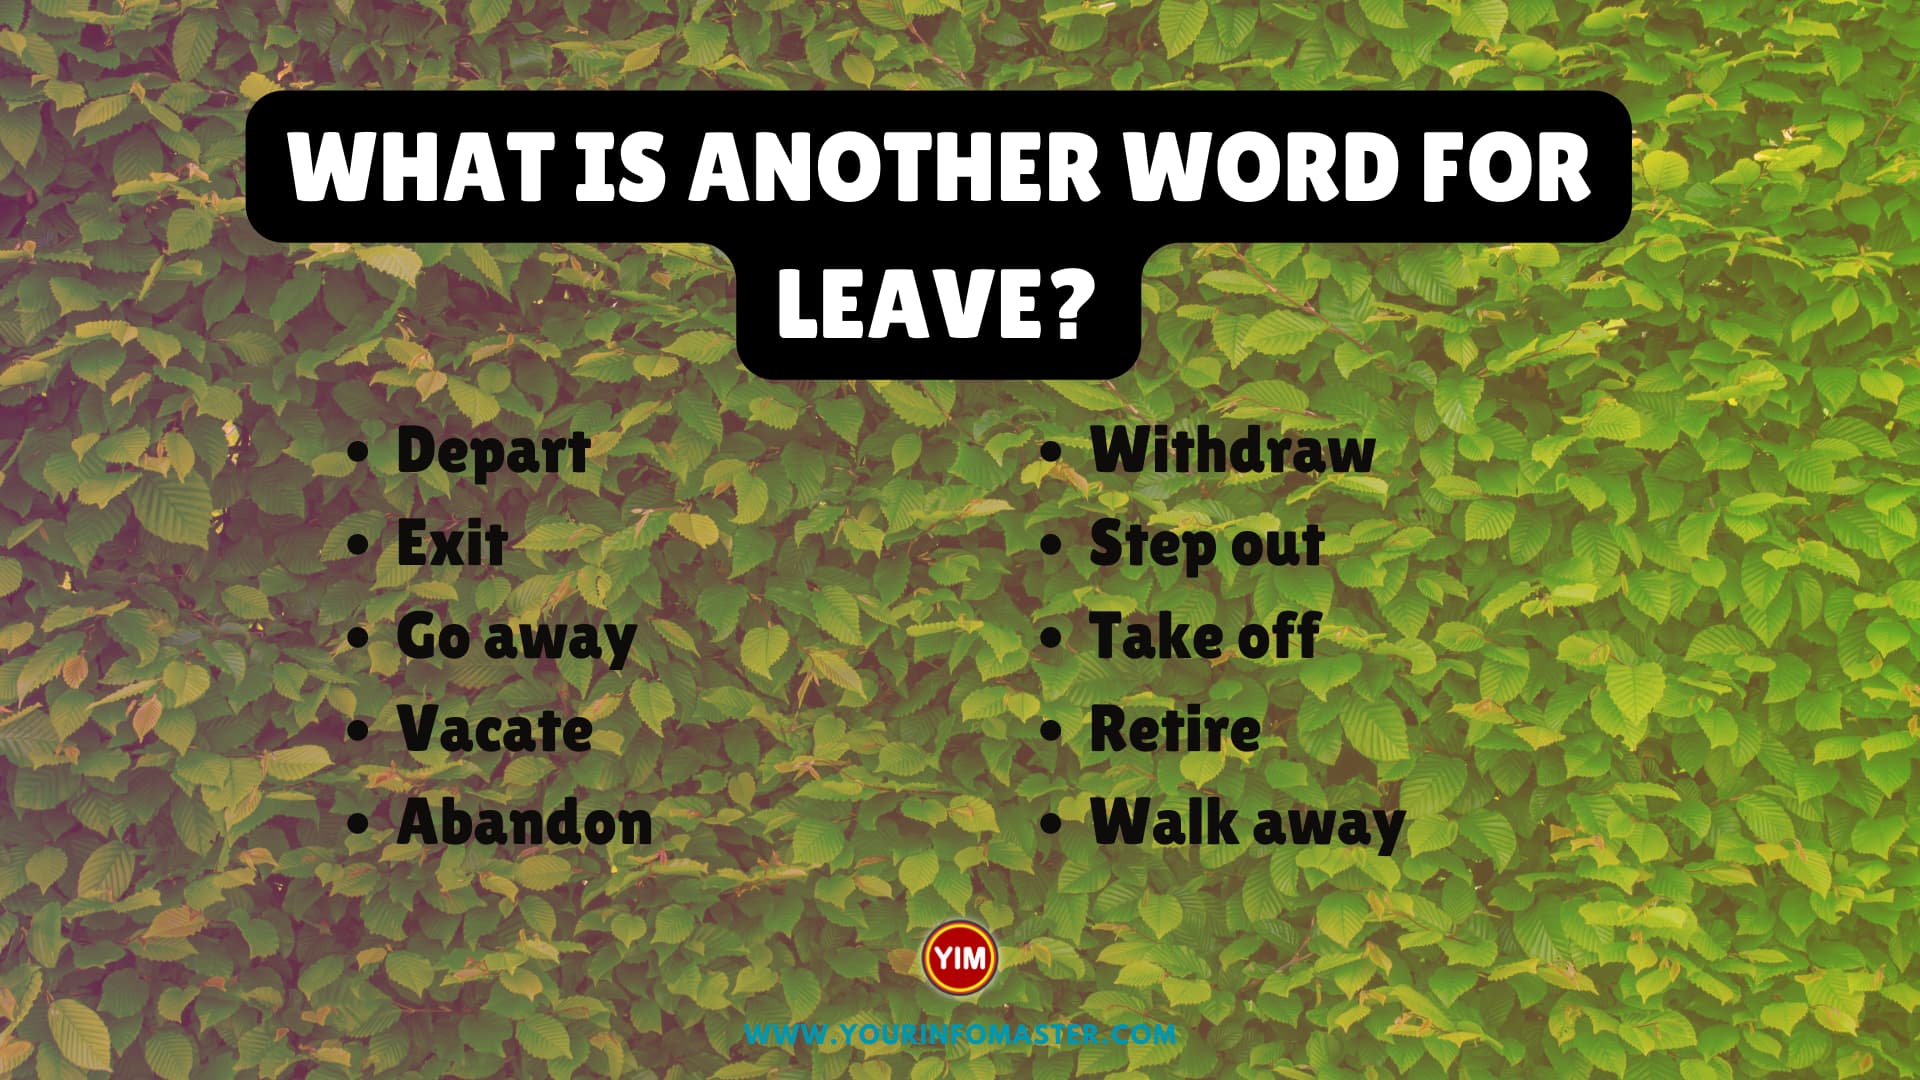 What is another word for Leave